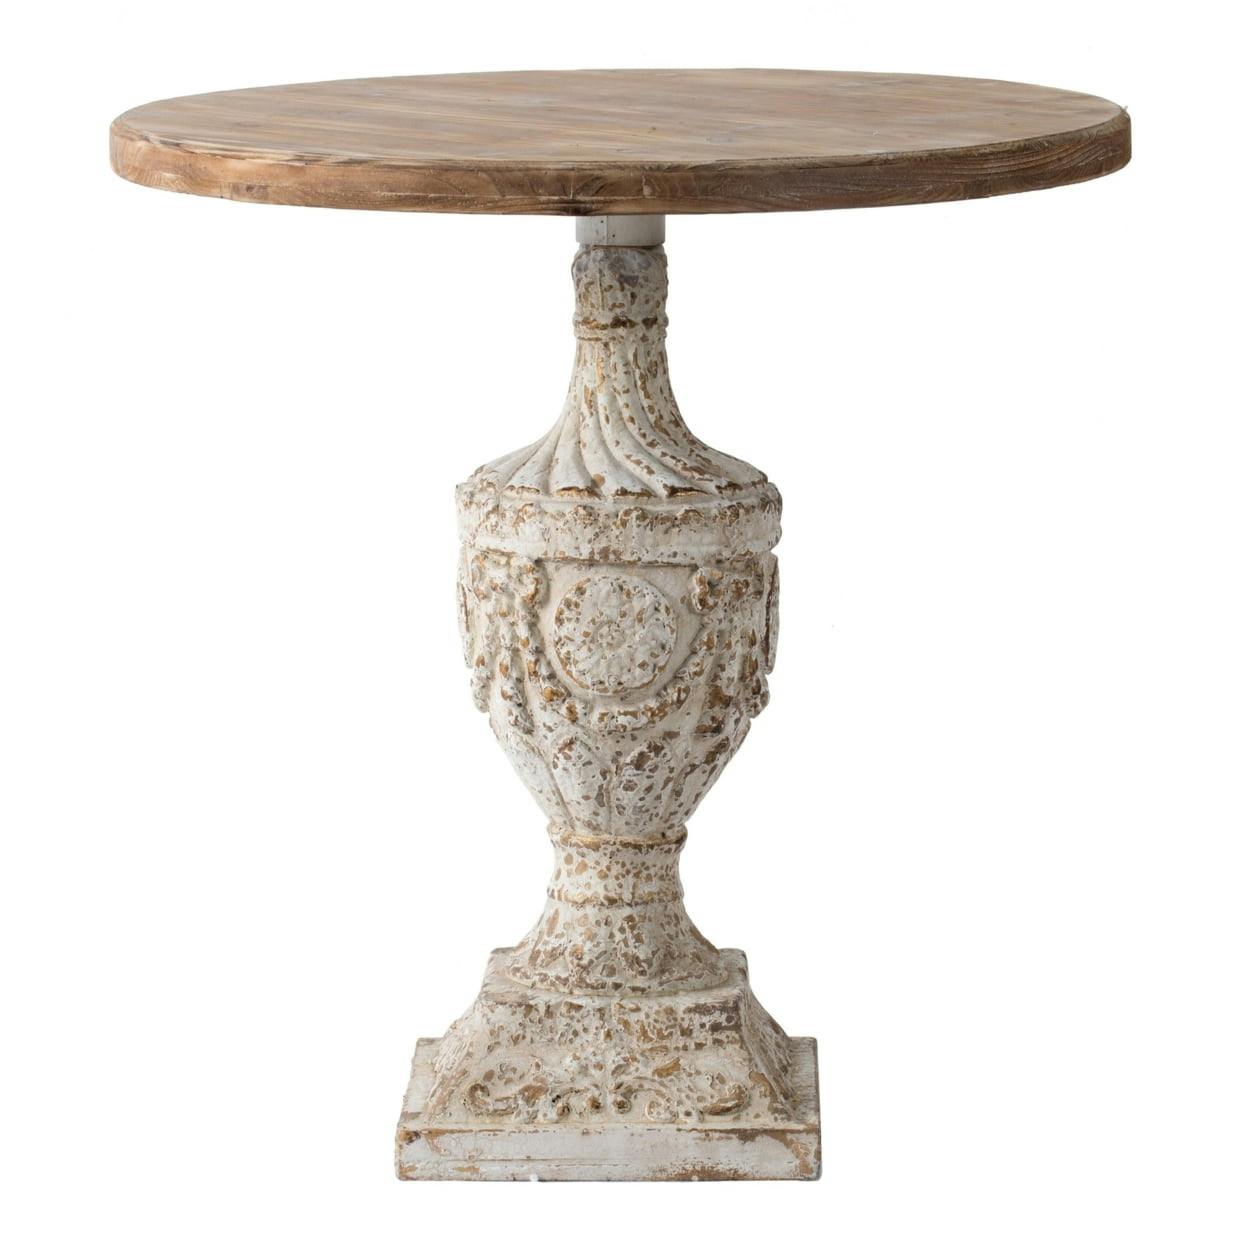 31" Round Weathered Fir Wood Pedestal Accent Table with Storage